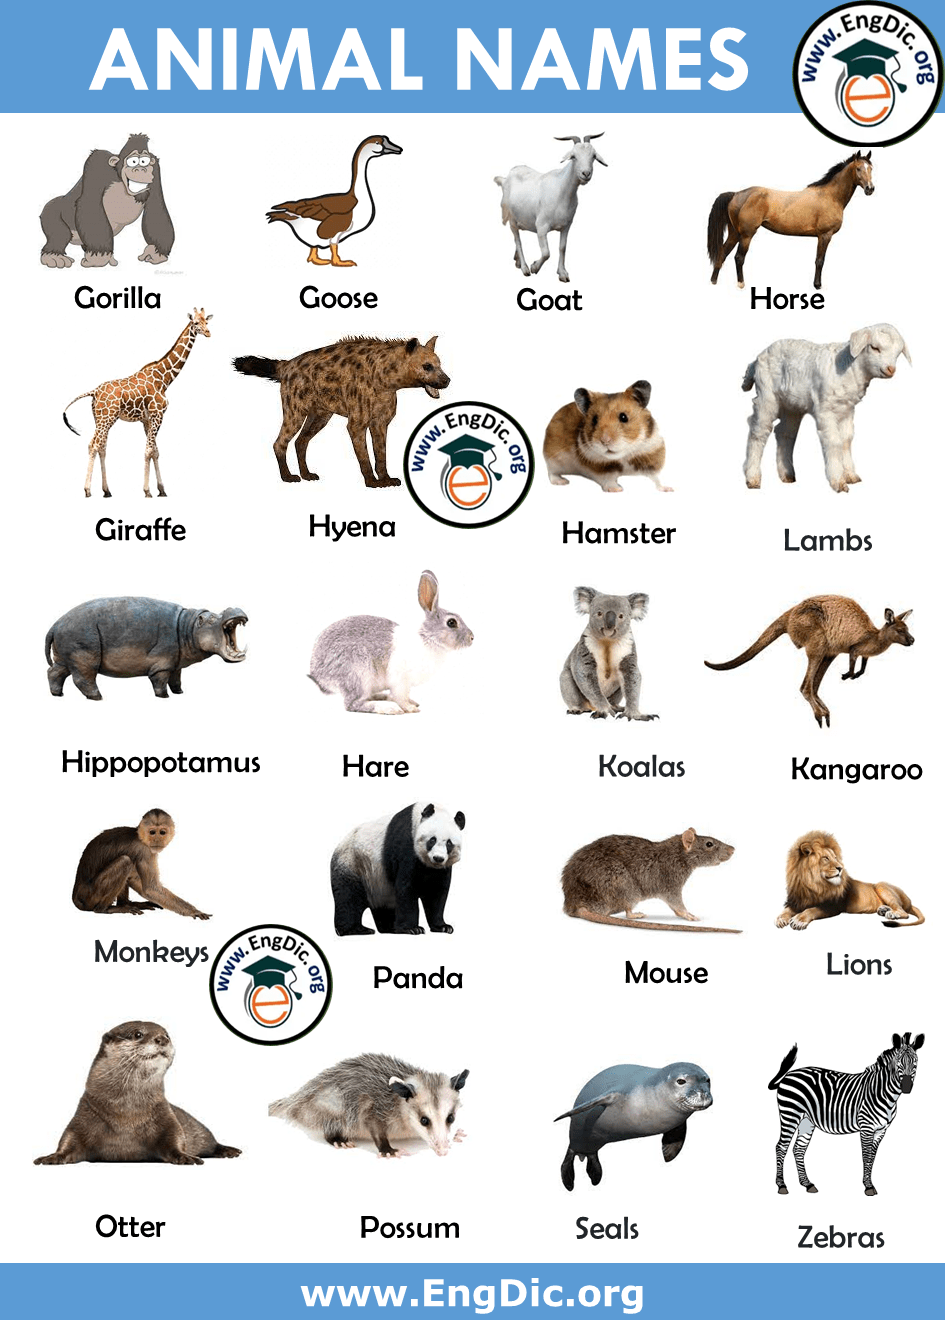 20+ Animals Name List in English A to Z   Pictures and PDF   EngDic